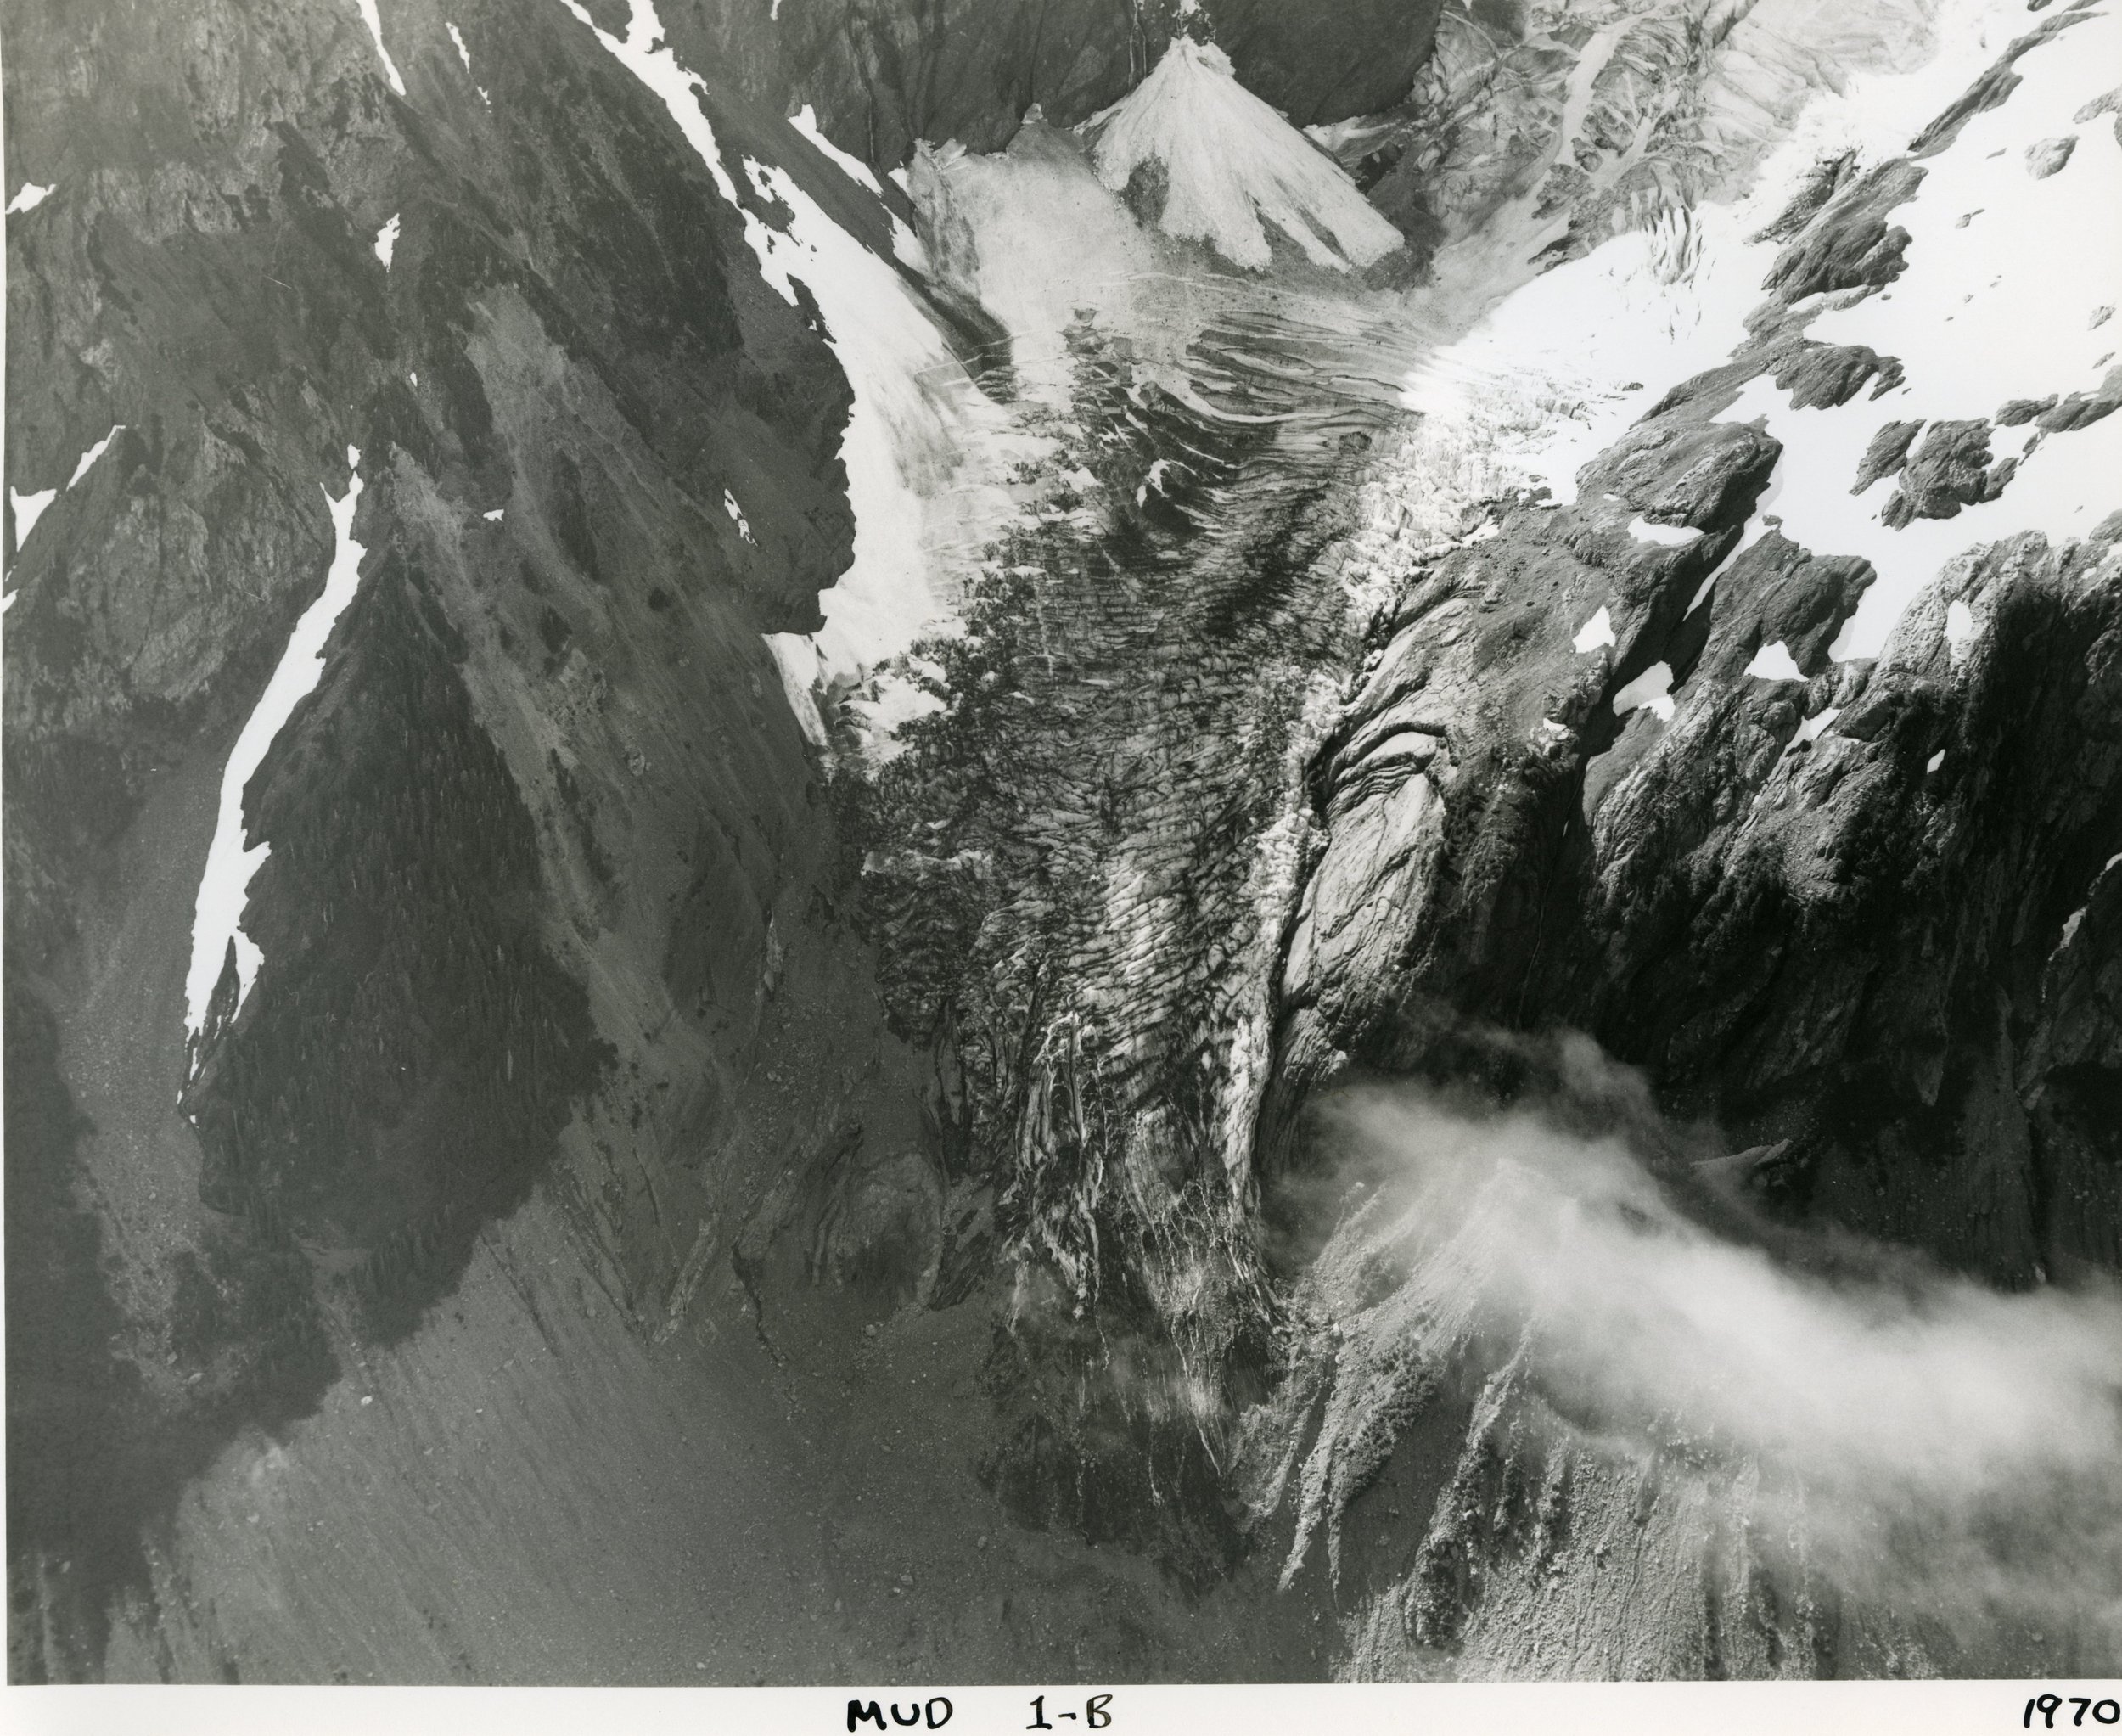 A photo of the Black Glacier taken in 1970. // Photo courtesy of Bill Baccus